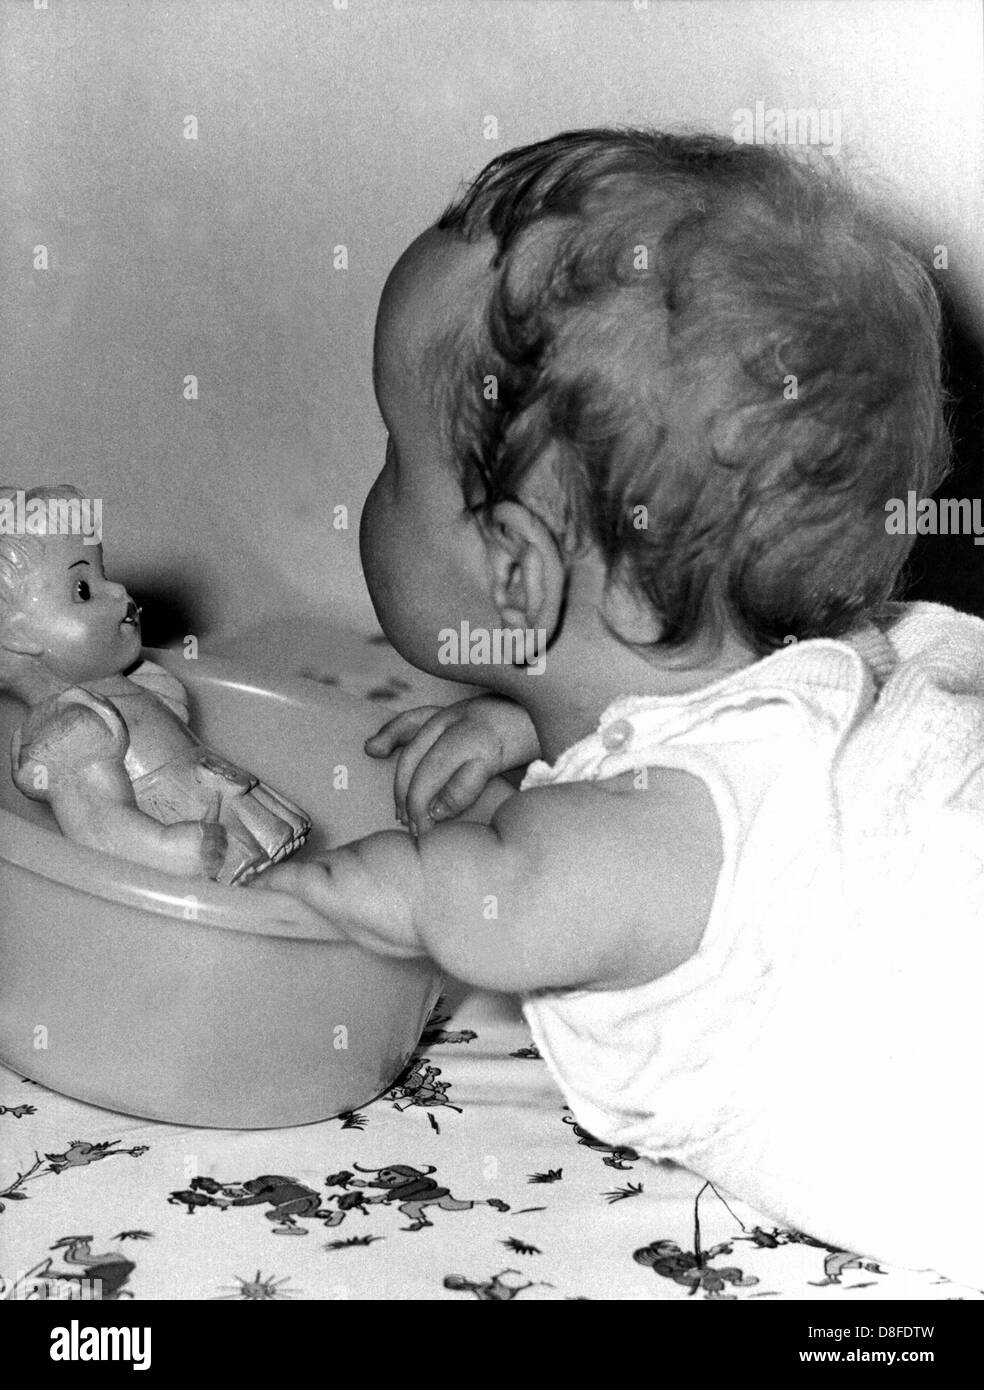 A handicapped child plays with a doll in the 'Anna-Stift' hospital in Hanover, Germany. In the late 1950s and 60s about 8,000 to 12,000 children were born with serious deformities, many died, due to the use of the sleeping drug Contergan by their mothers during pregnancy. Drugs containing thalidomide, Contergan among them, were distributed starting 1 October 1957 by Stollberg (located near Aachen, Germany) based pharmaceuticals company Grünenthal without proper testing and without barring the drug's use during pregnancy. Reports of serious damages to people's health were ignored until a newspa Stock Photo